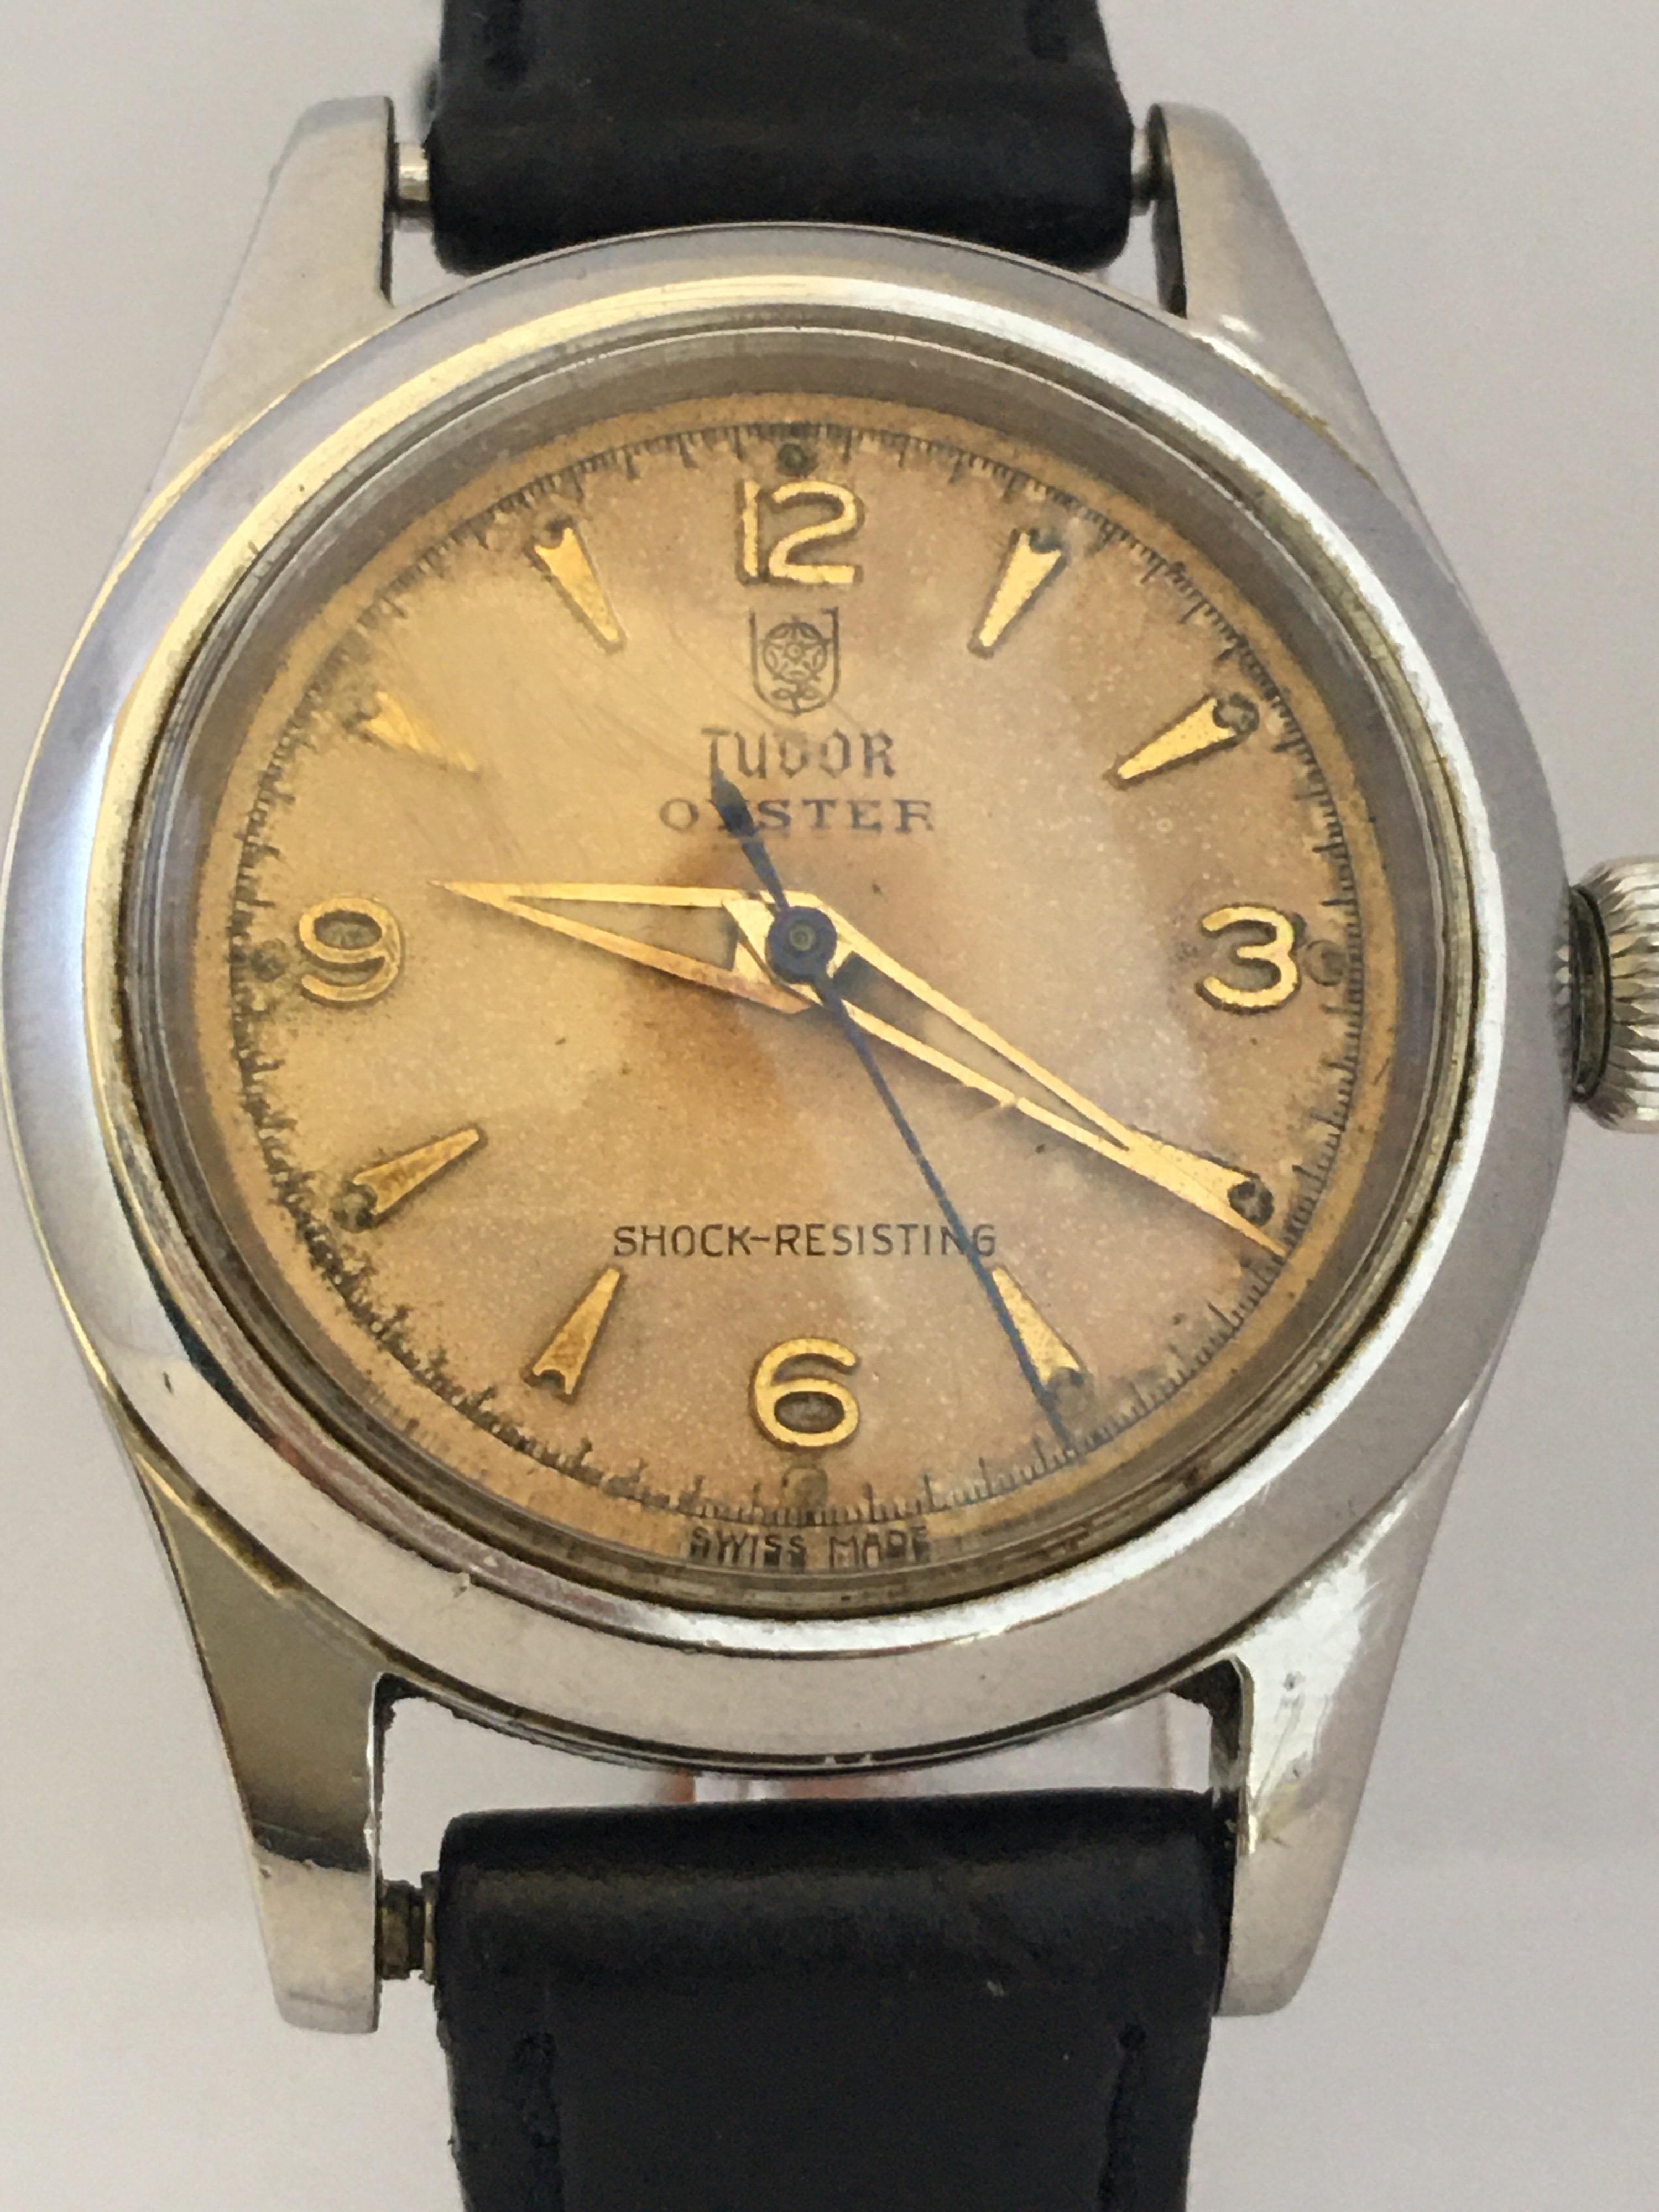 This beautiful pre-owned vintage hand-winding watch is in good working condition and it is ticking well. Visible signs of ageing and wear with light scratches and blemishes on the glass and on the watch case as shown. The dial has aged as shown. The